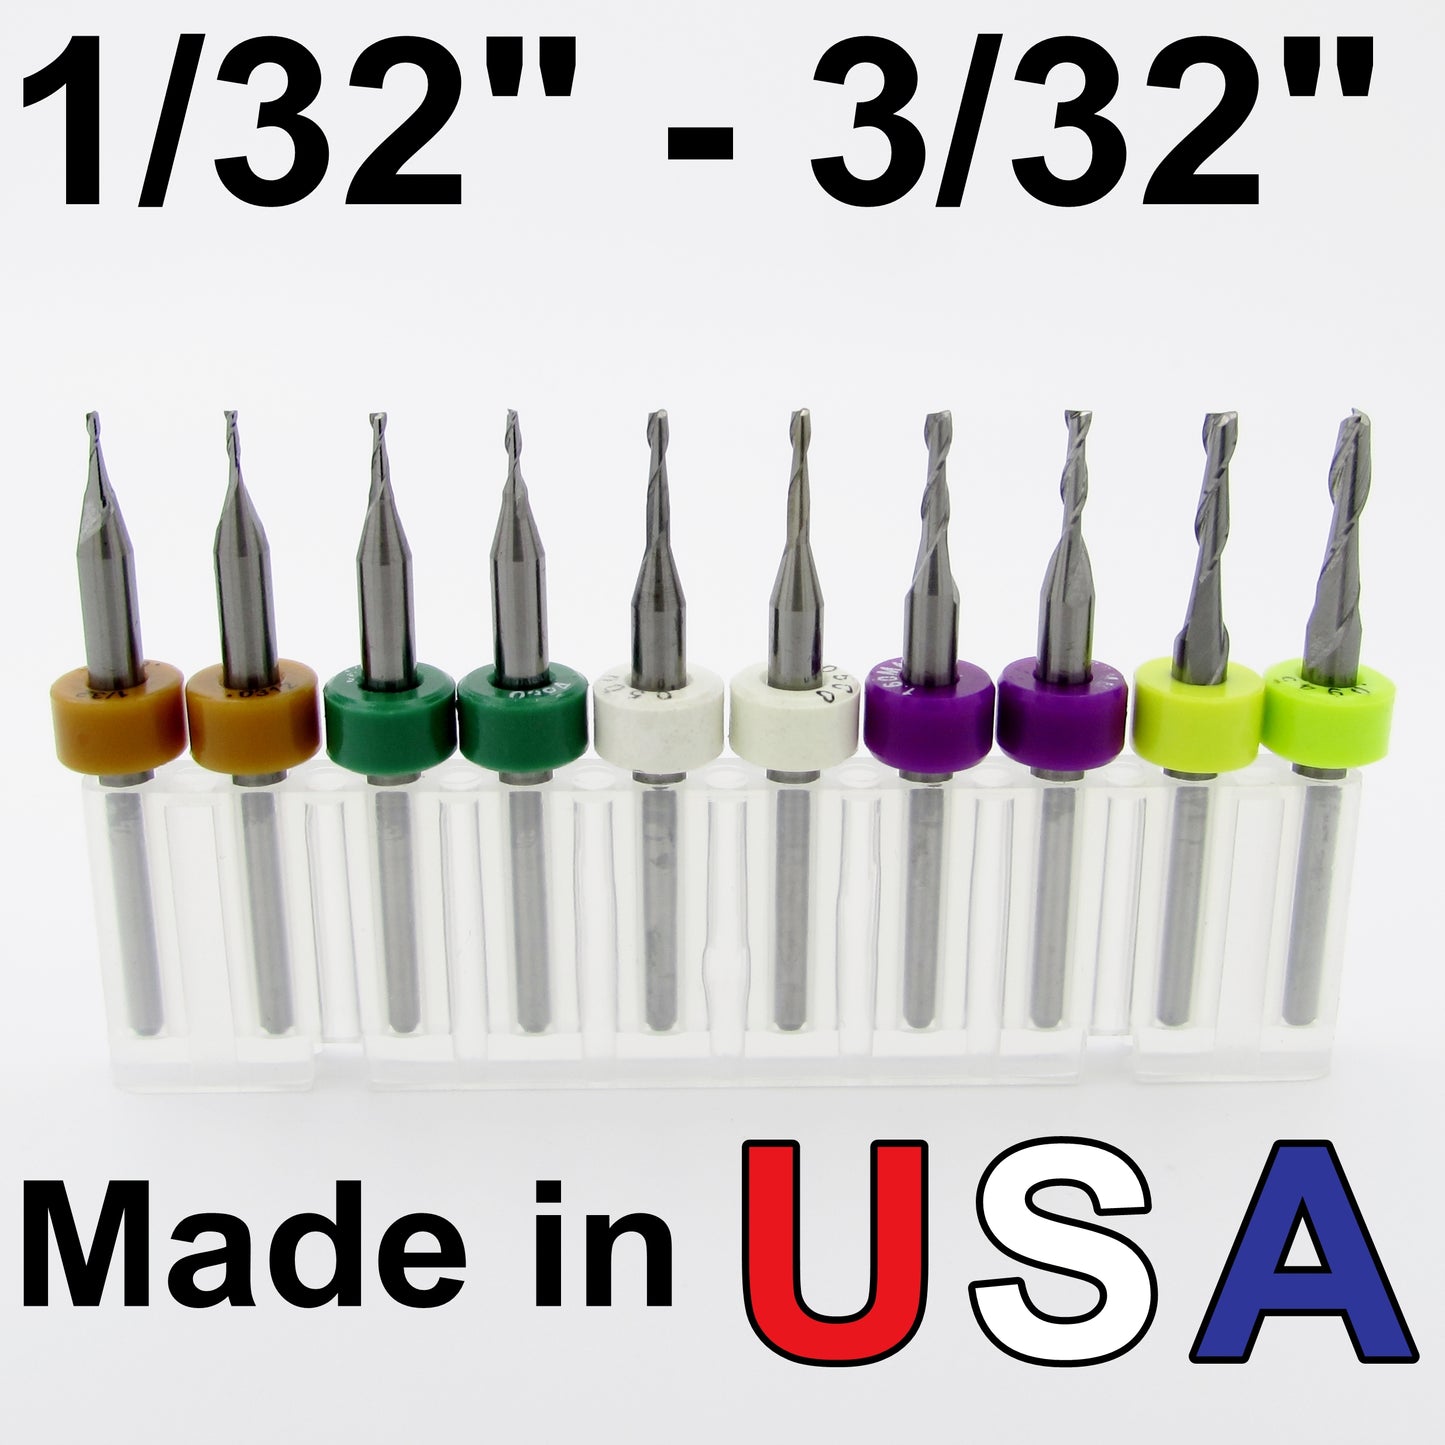 10 Piece (Five Size) Two Flute Carbide End Mill Set 1/32" to 3/32" - Made in USA